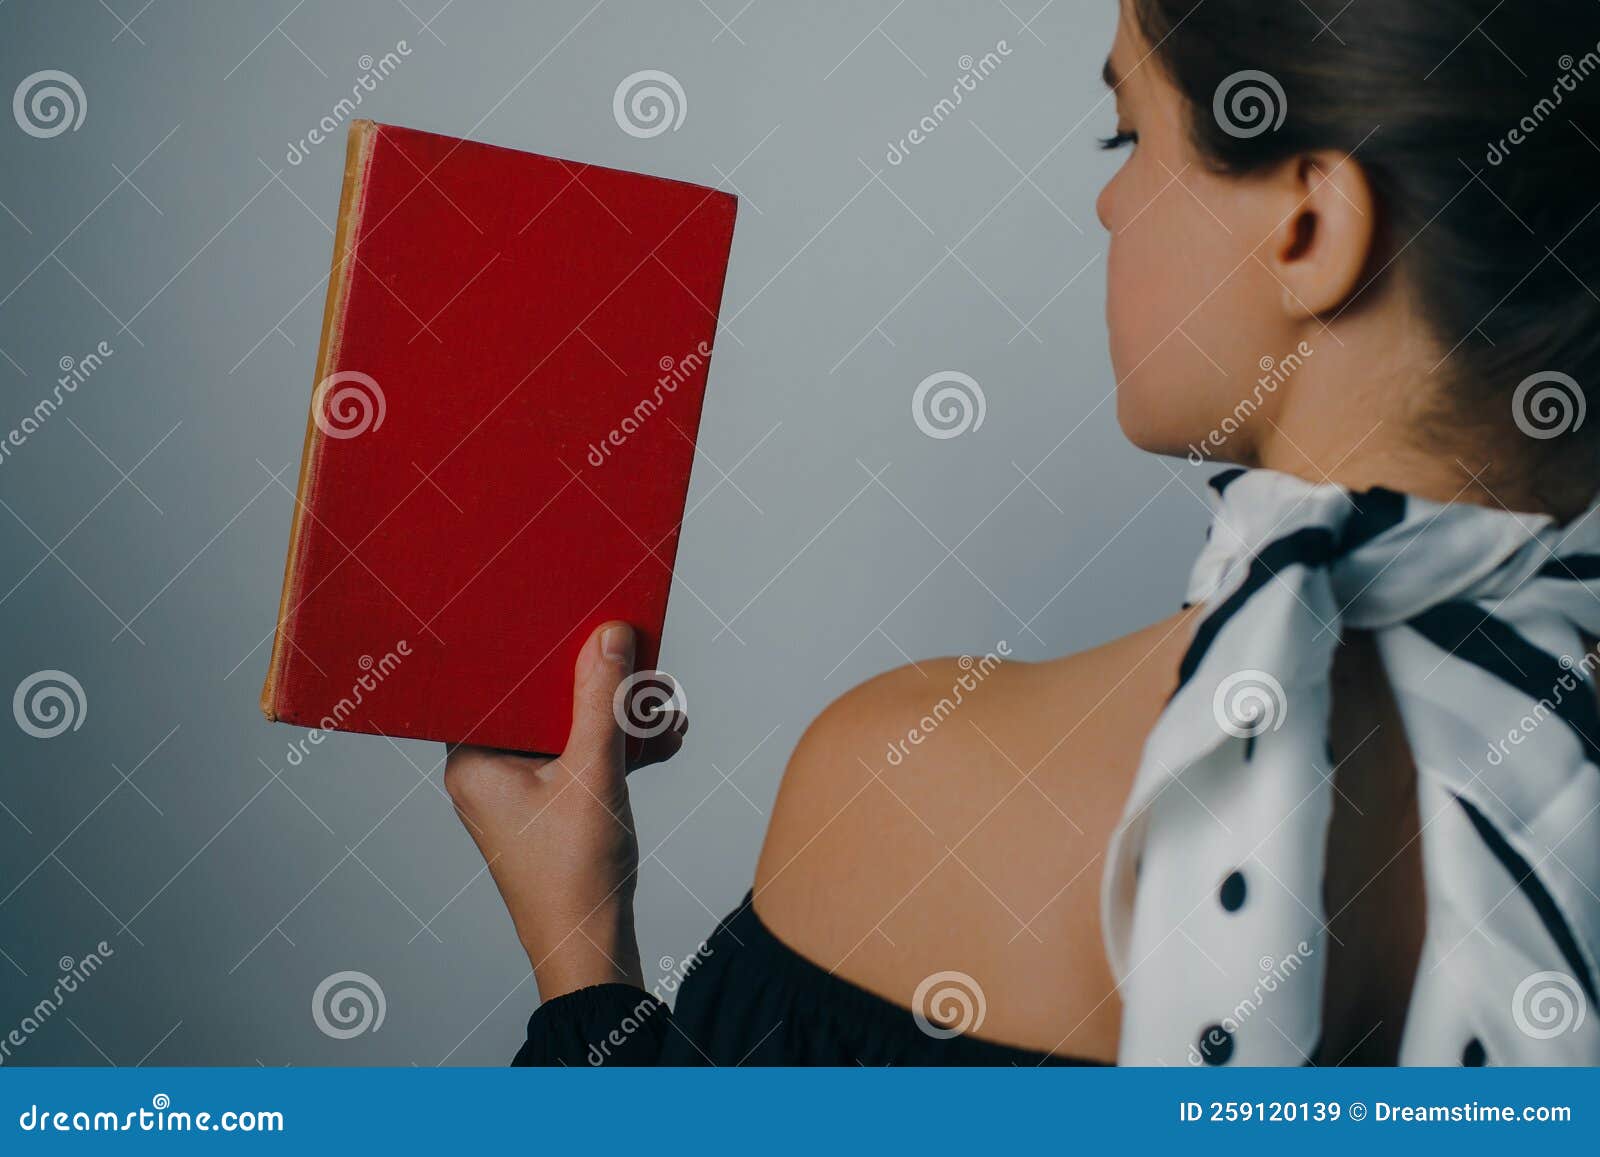 young woman with bare shoulders holding vintage books